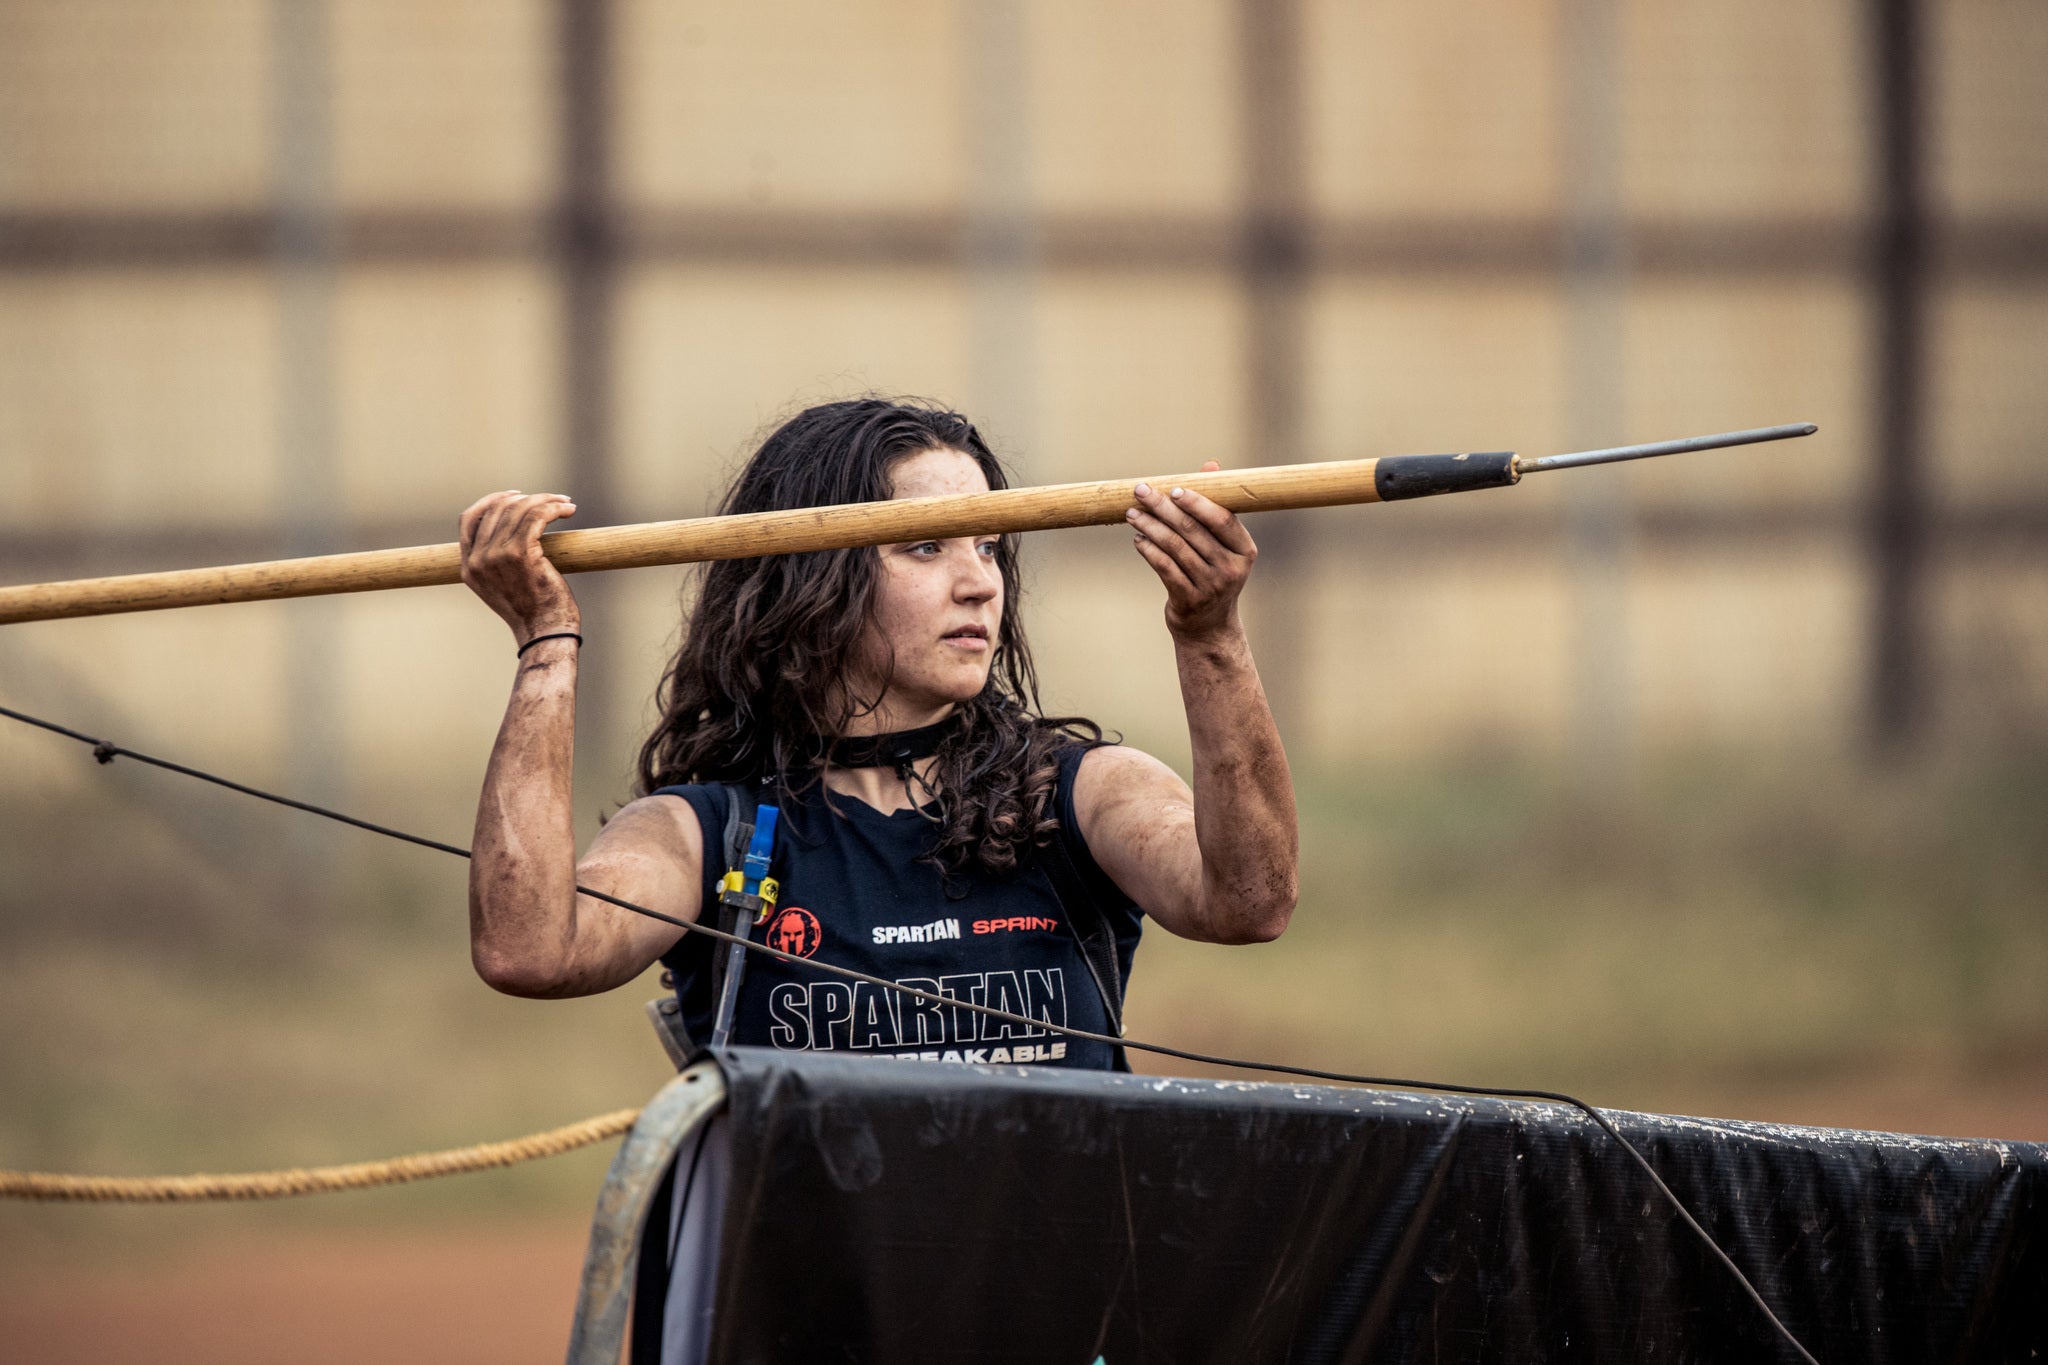 a woman perfected her Spartan Spear Throw obstacle after following four tips